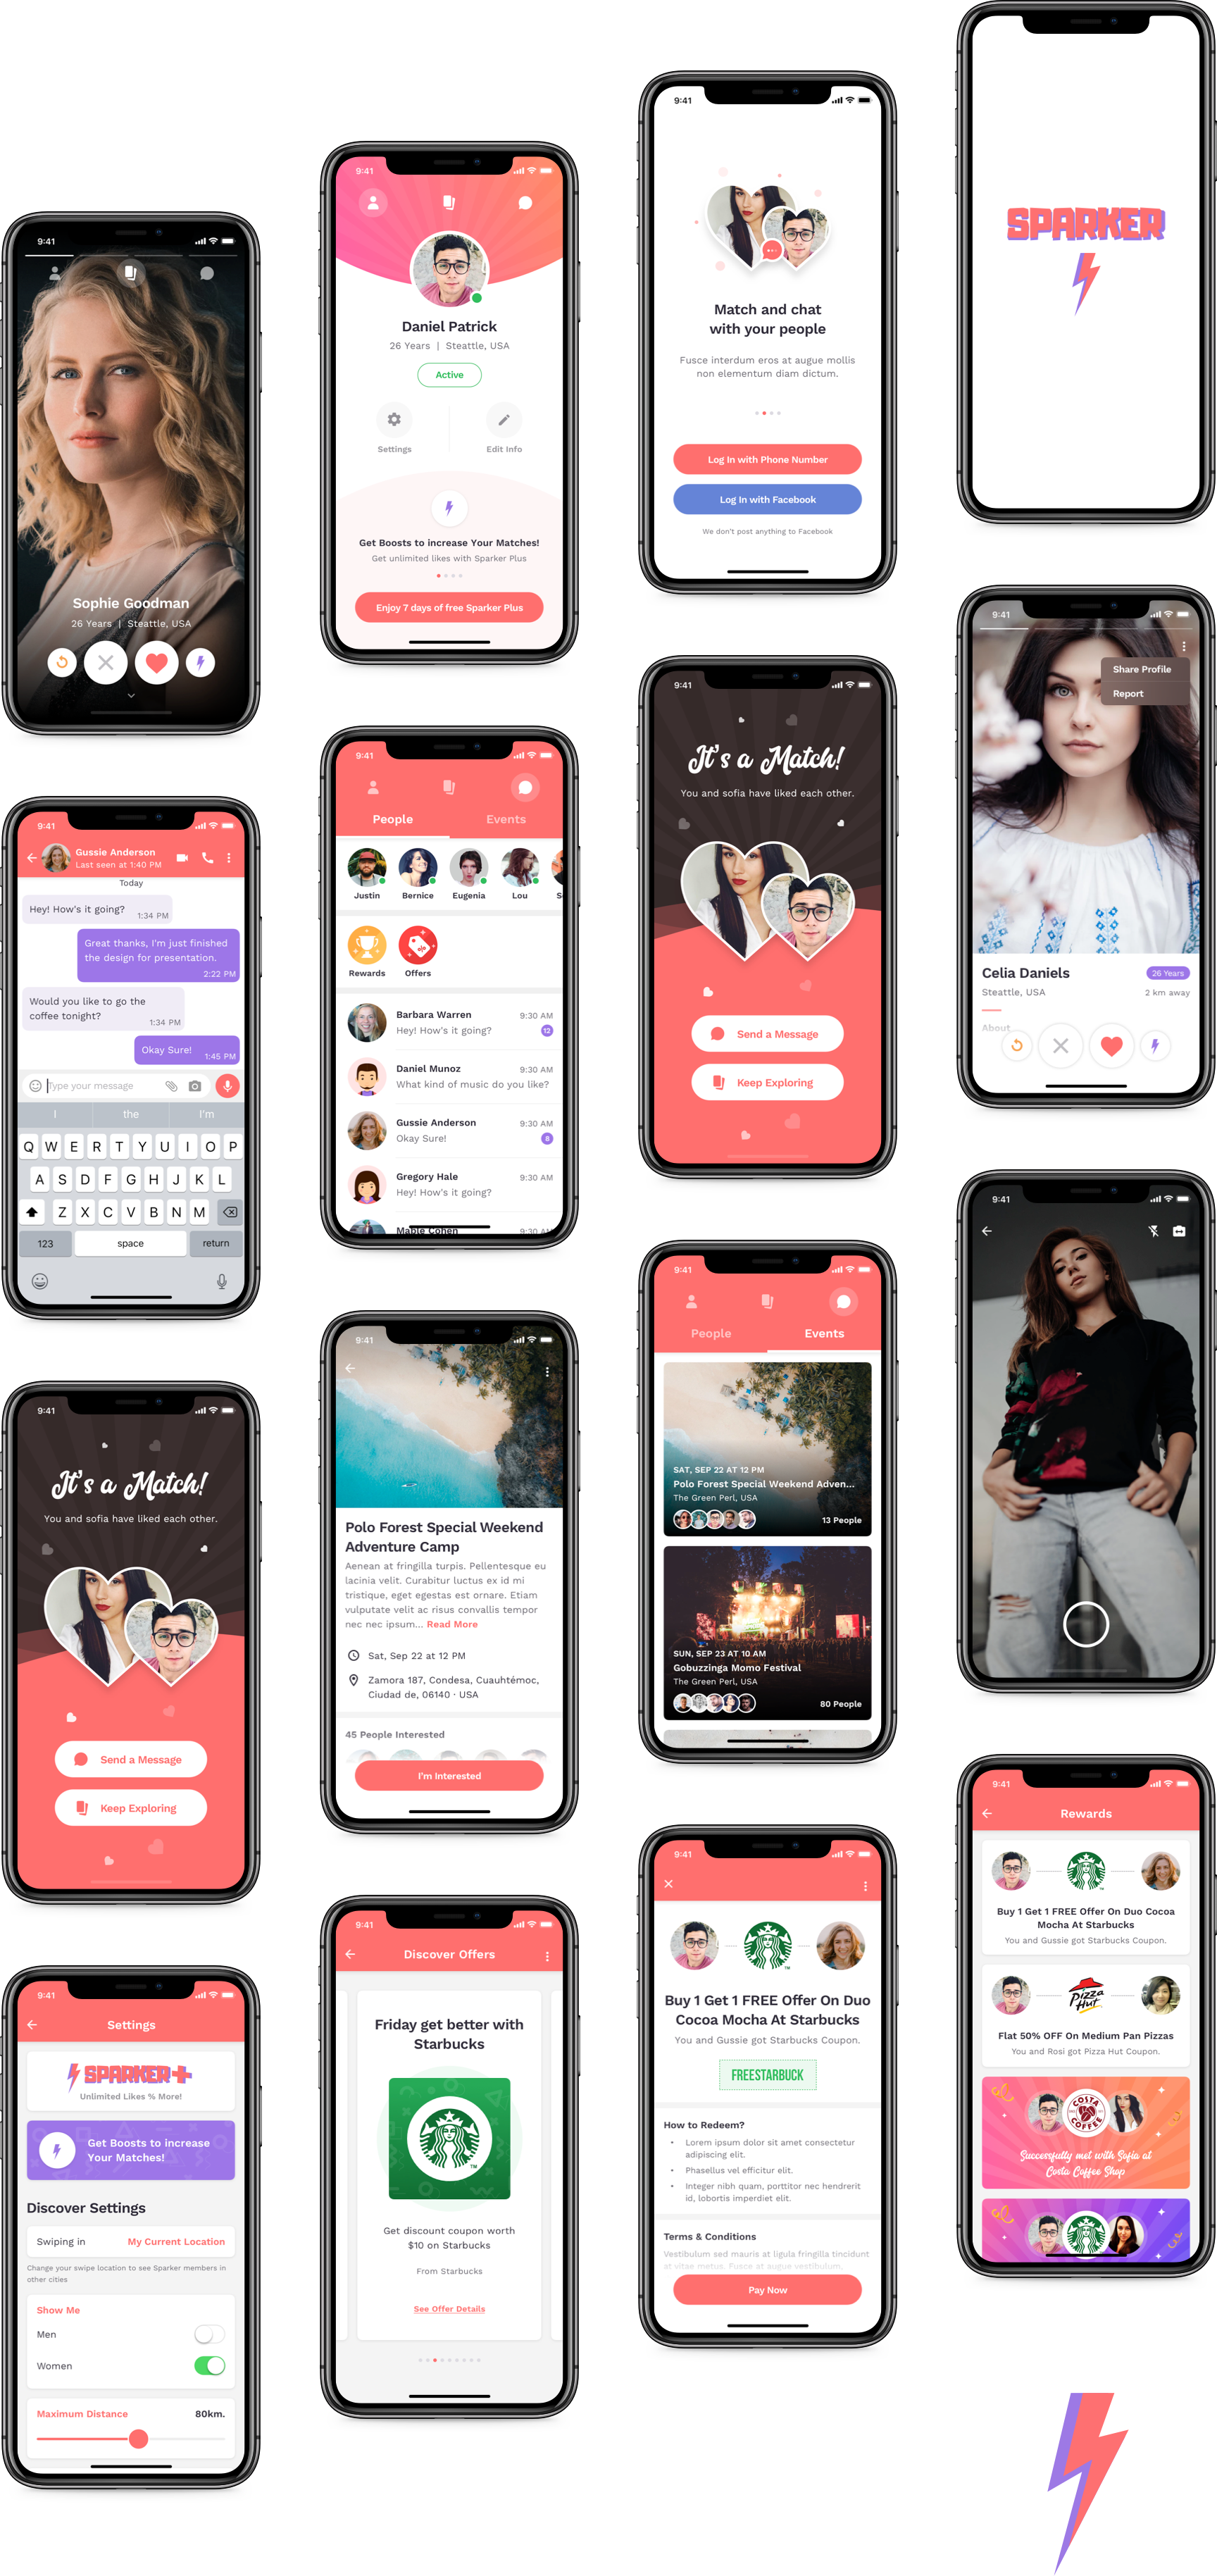 Screen snaps of an online dating app sparker